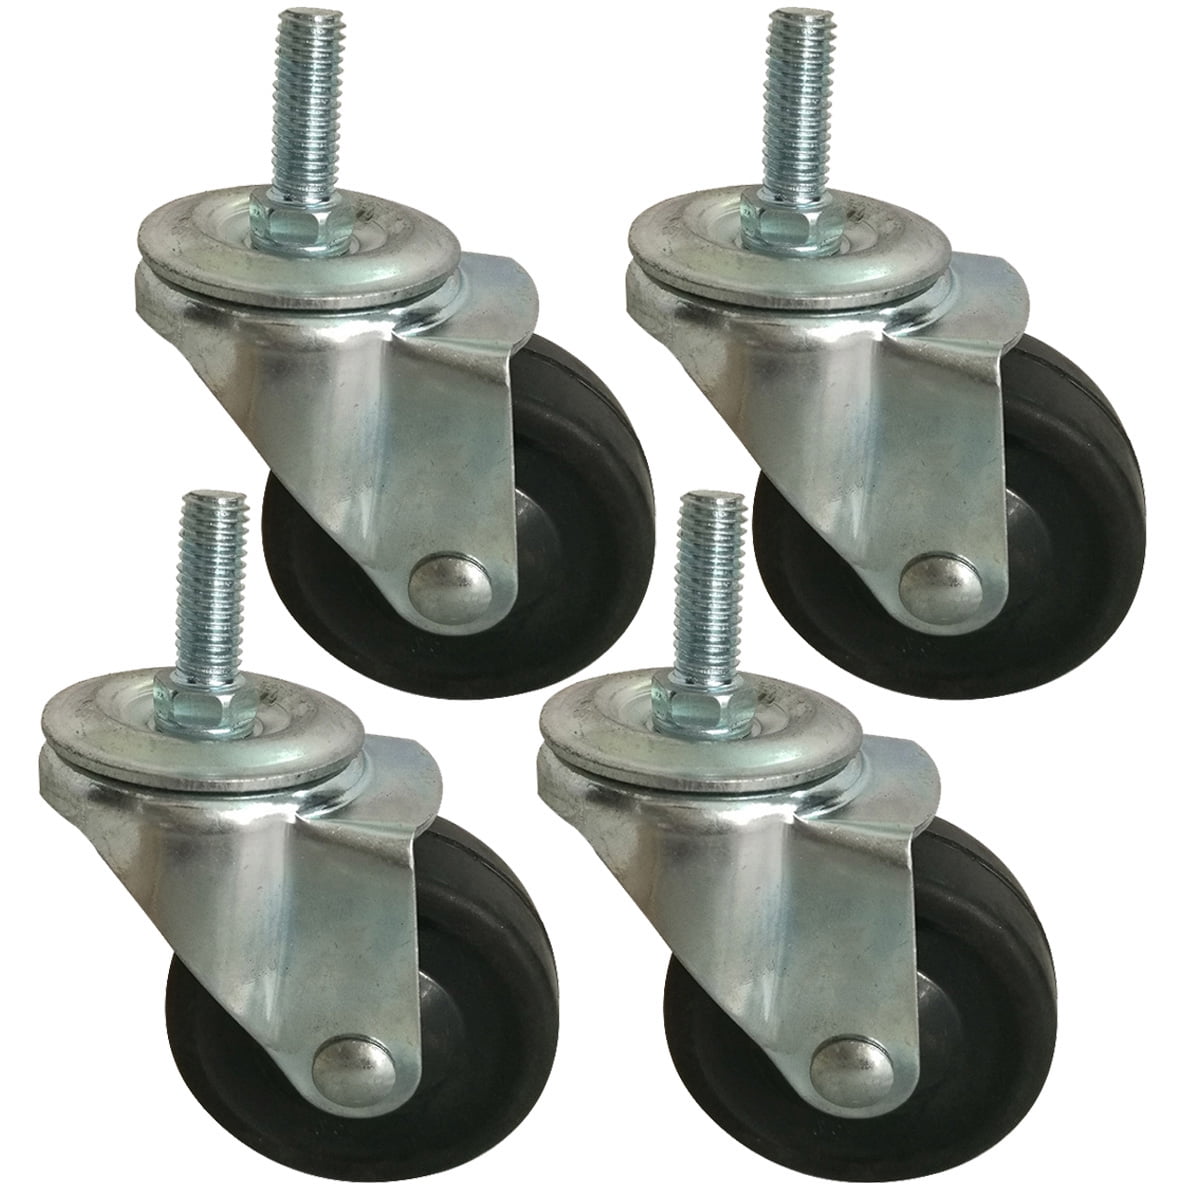 4x 3 Inch Rubber Casters Heavy Duty Safety Brake Wheels For Wire Shelving Rack 